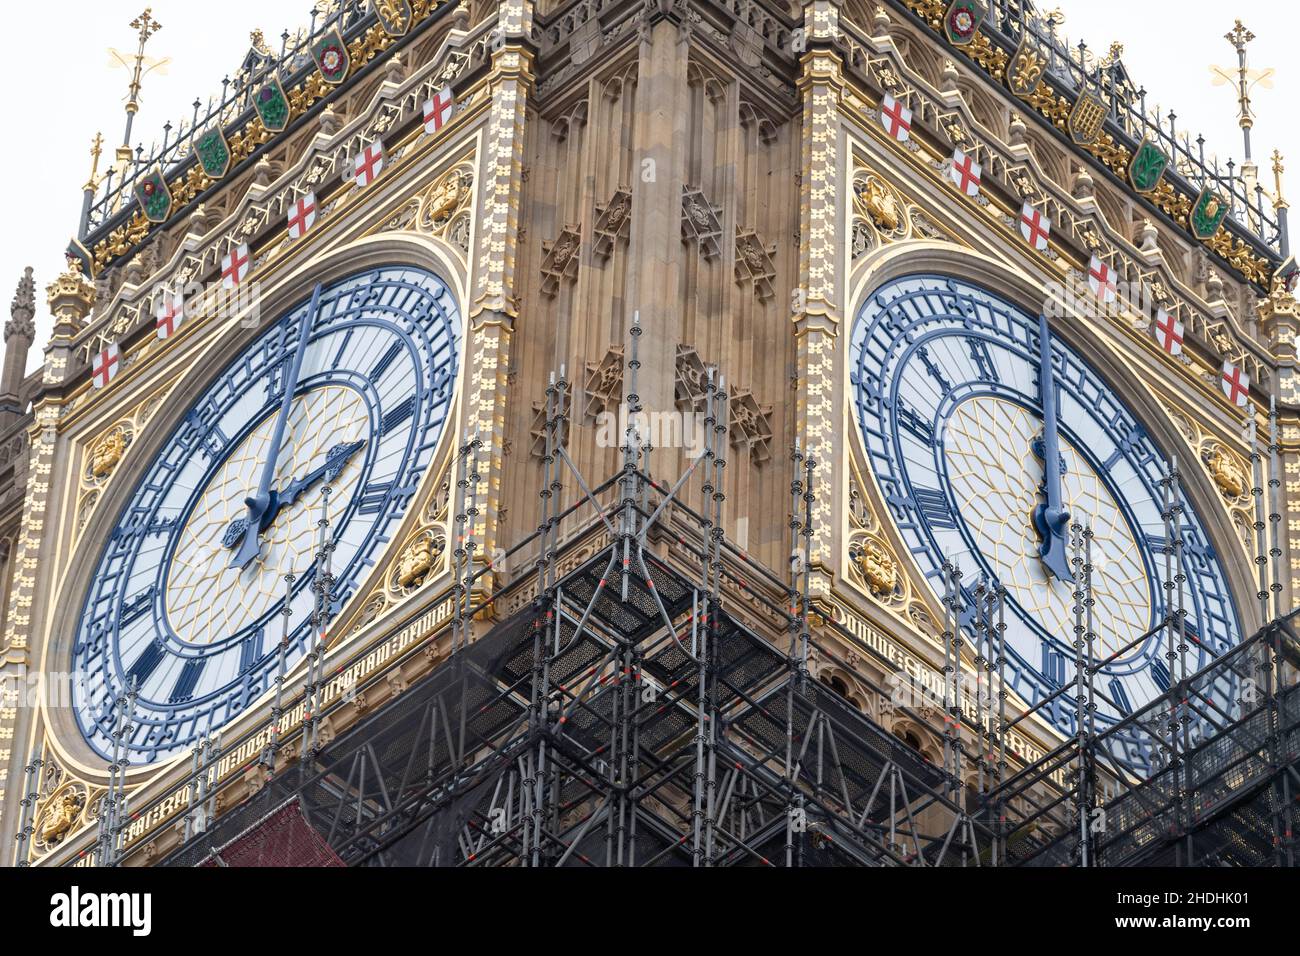 London, UK. 6th Jan, 2022. Work continues on the iconic Elizabeth Tower, home to Big Ben, at the North end of the Palace of Westminster. The work has restored that original paintwork and fine detail on the face of the Elizabeth Tower clocks. Credit: Ian Davidson/Alamy Live News Stock Photo